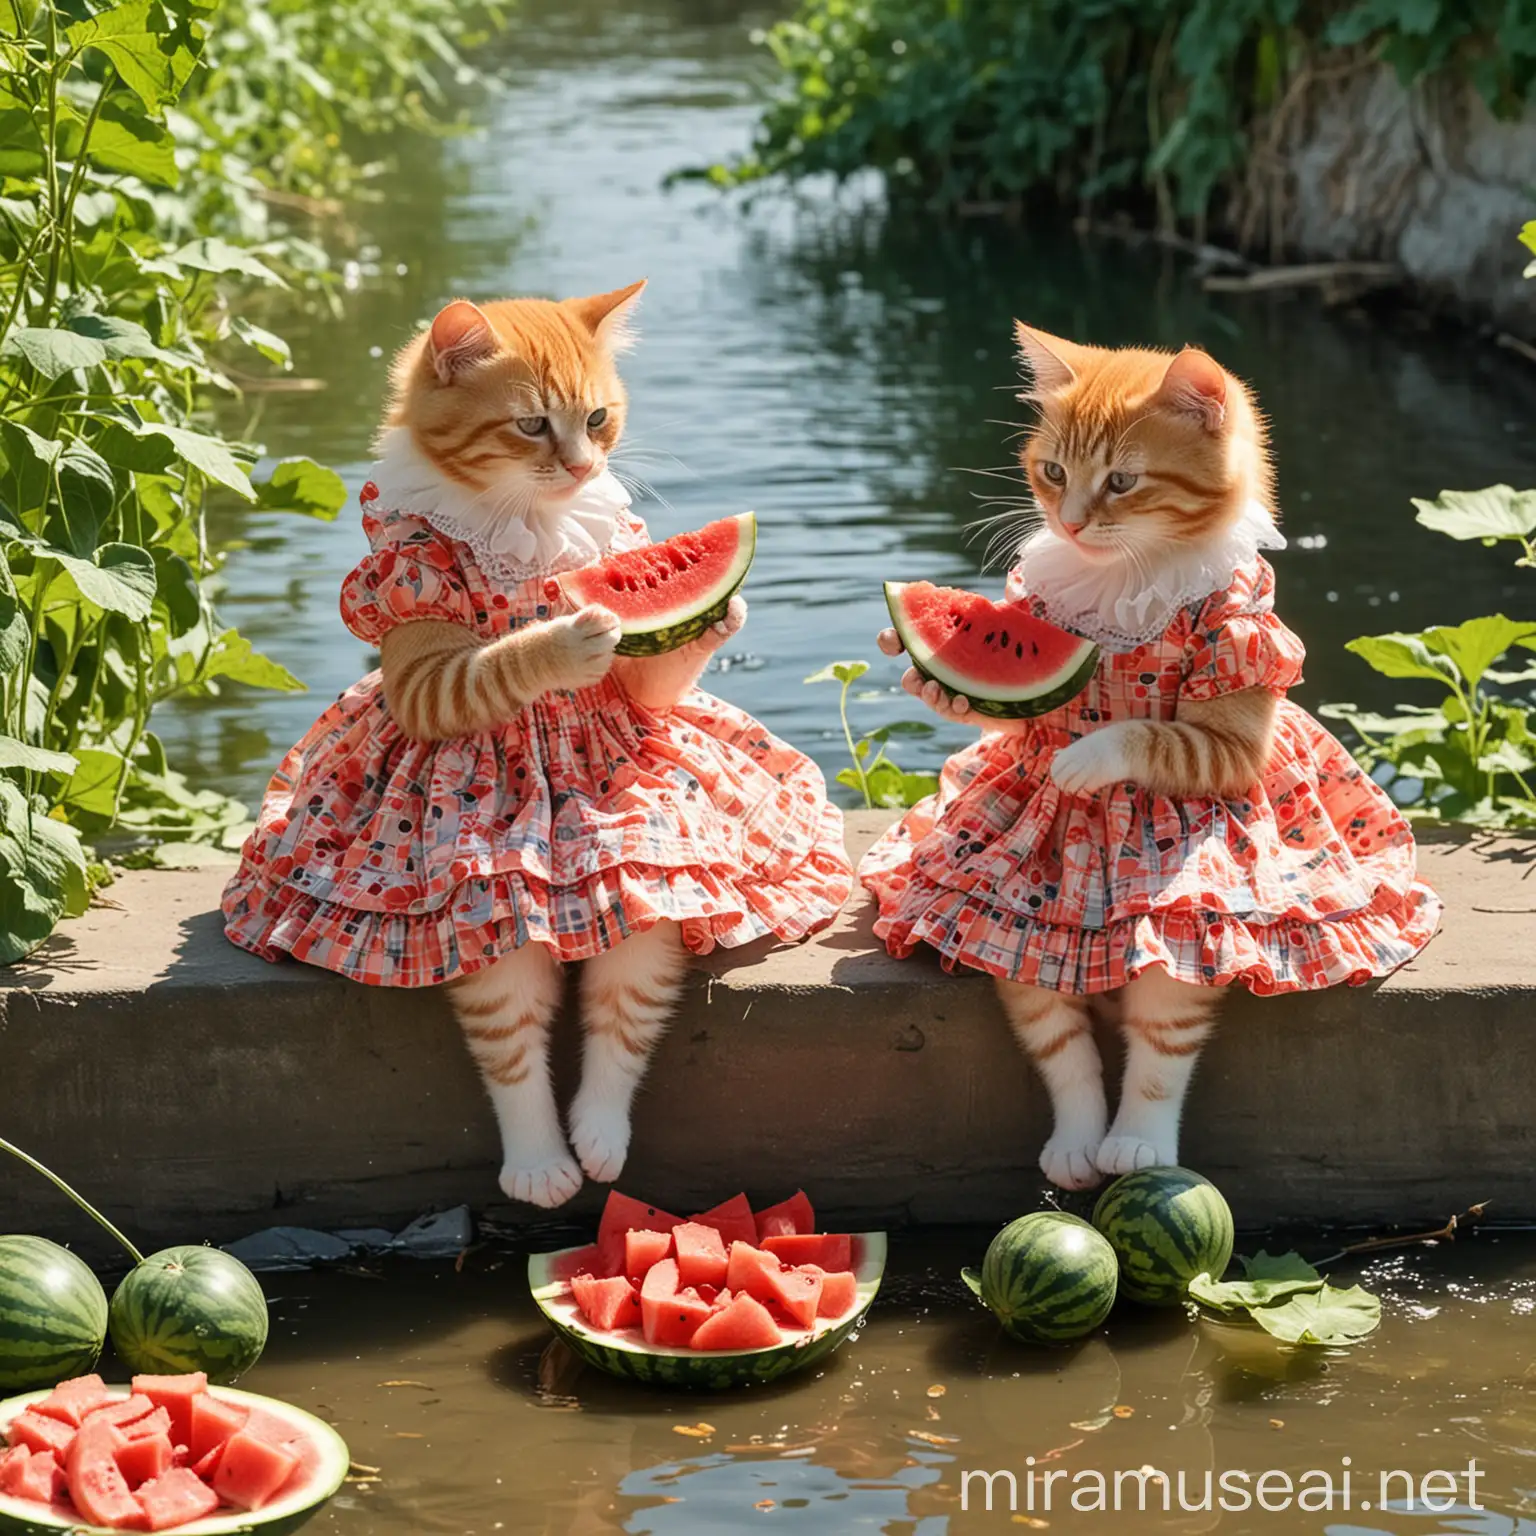 Two Cute Cats in Dresses Enjoying Watermelons by the Riverside